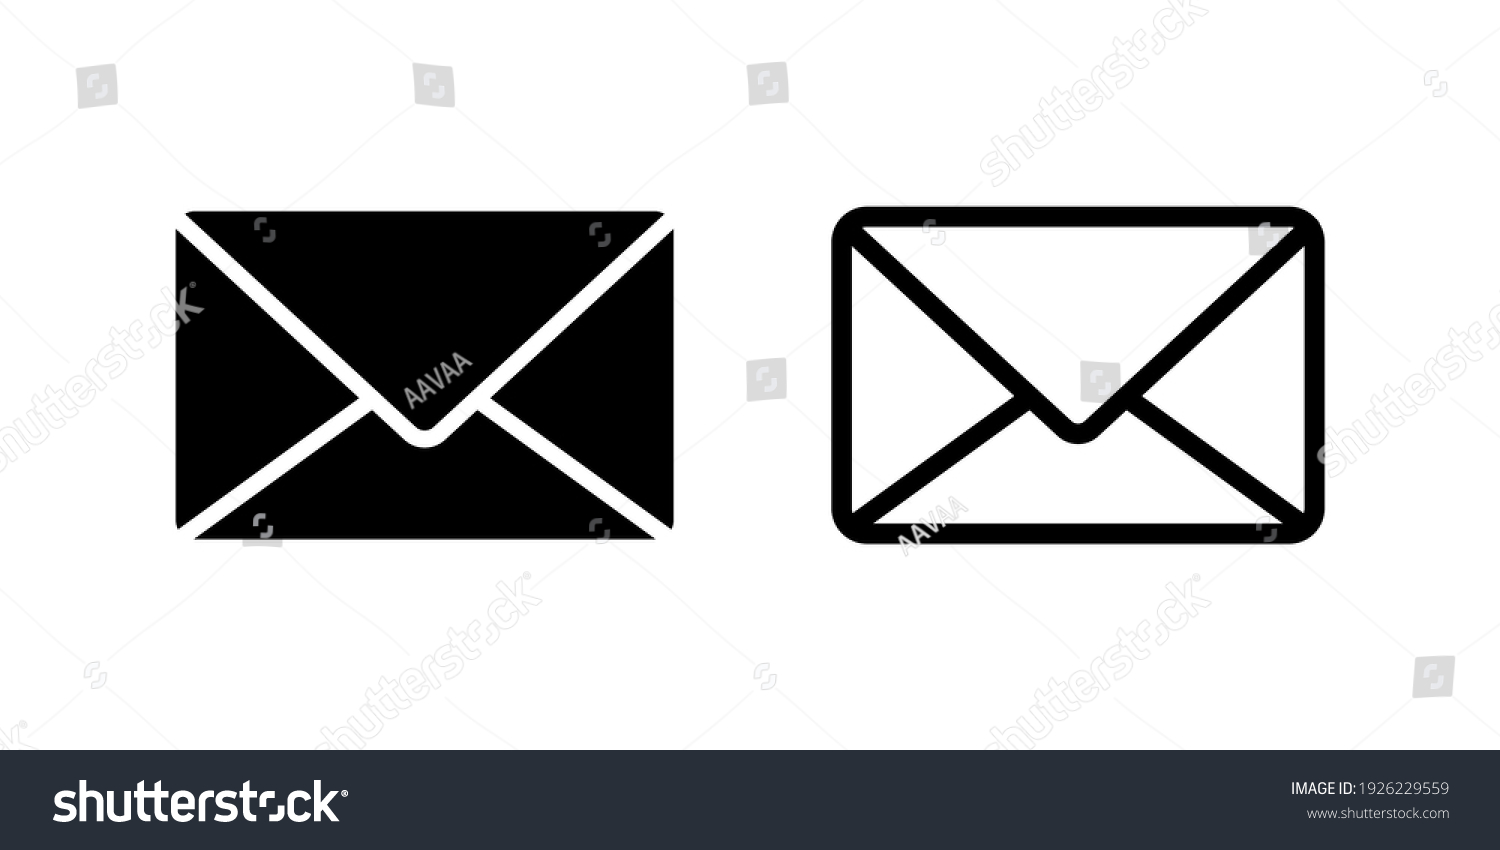 Mail icon set. email icon vector. E-mail icon. Envelope illustration #1926229559